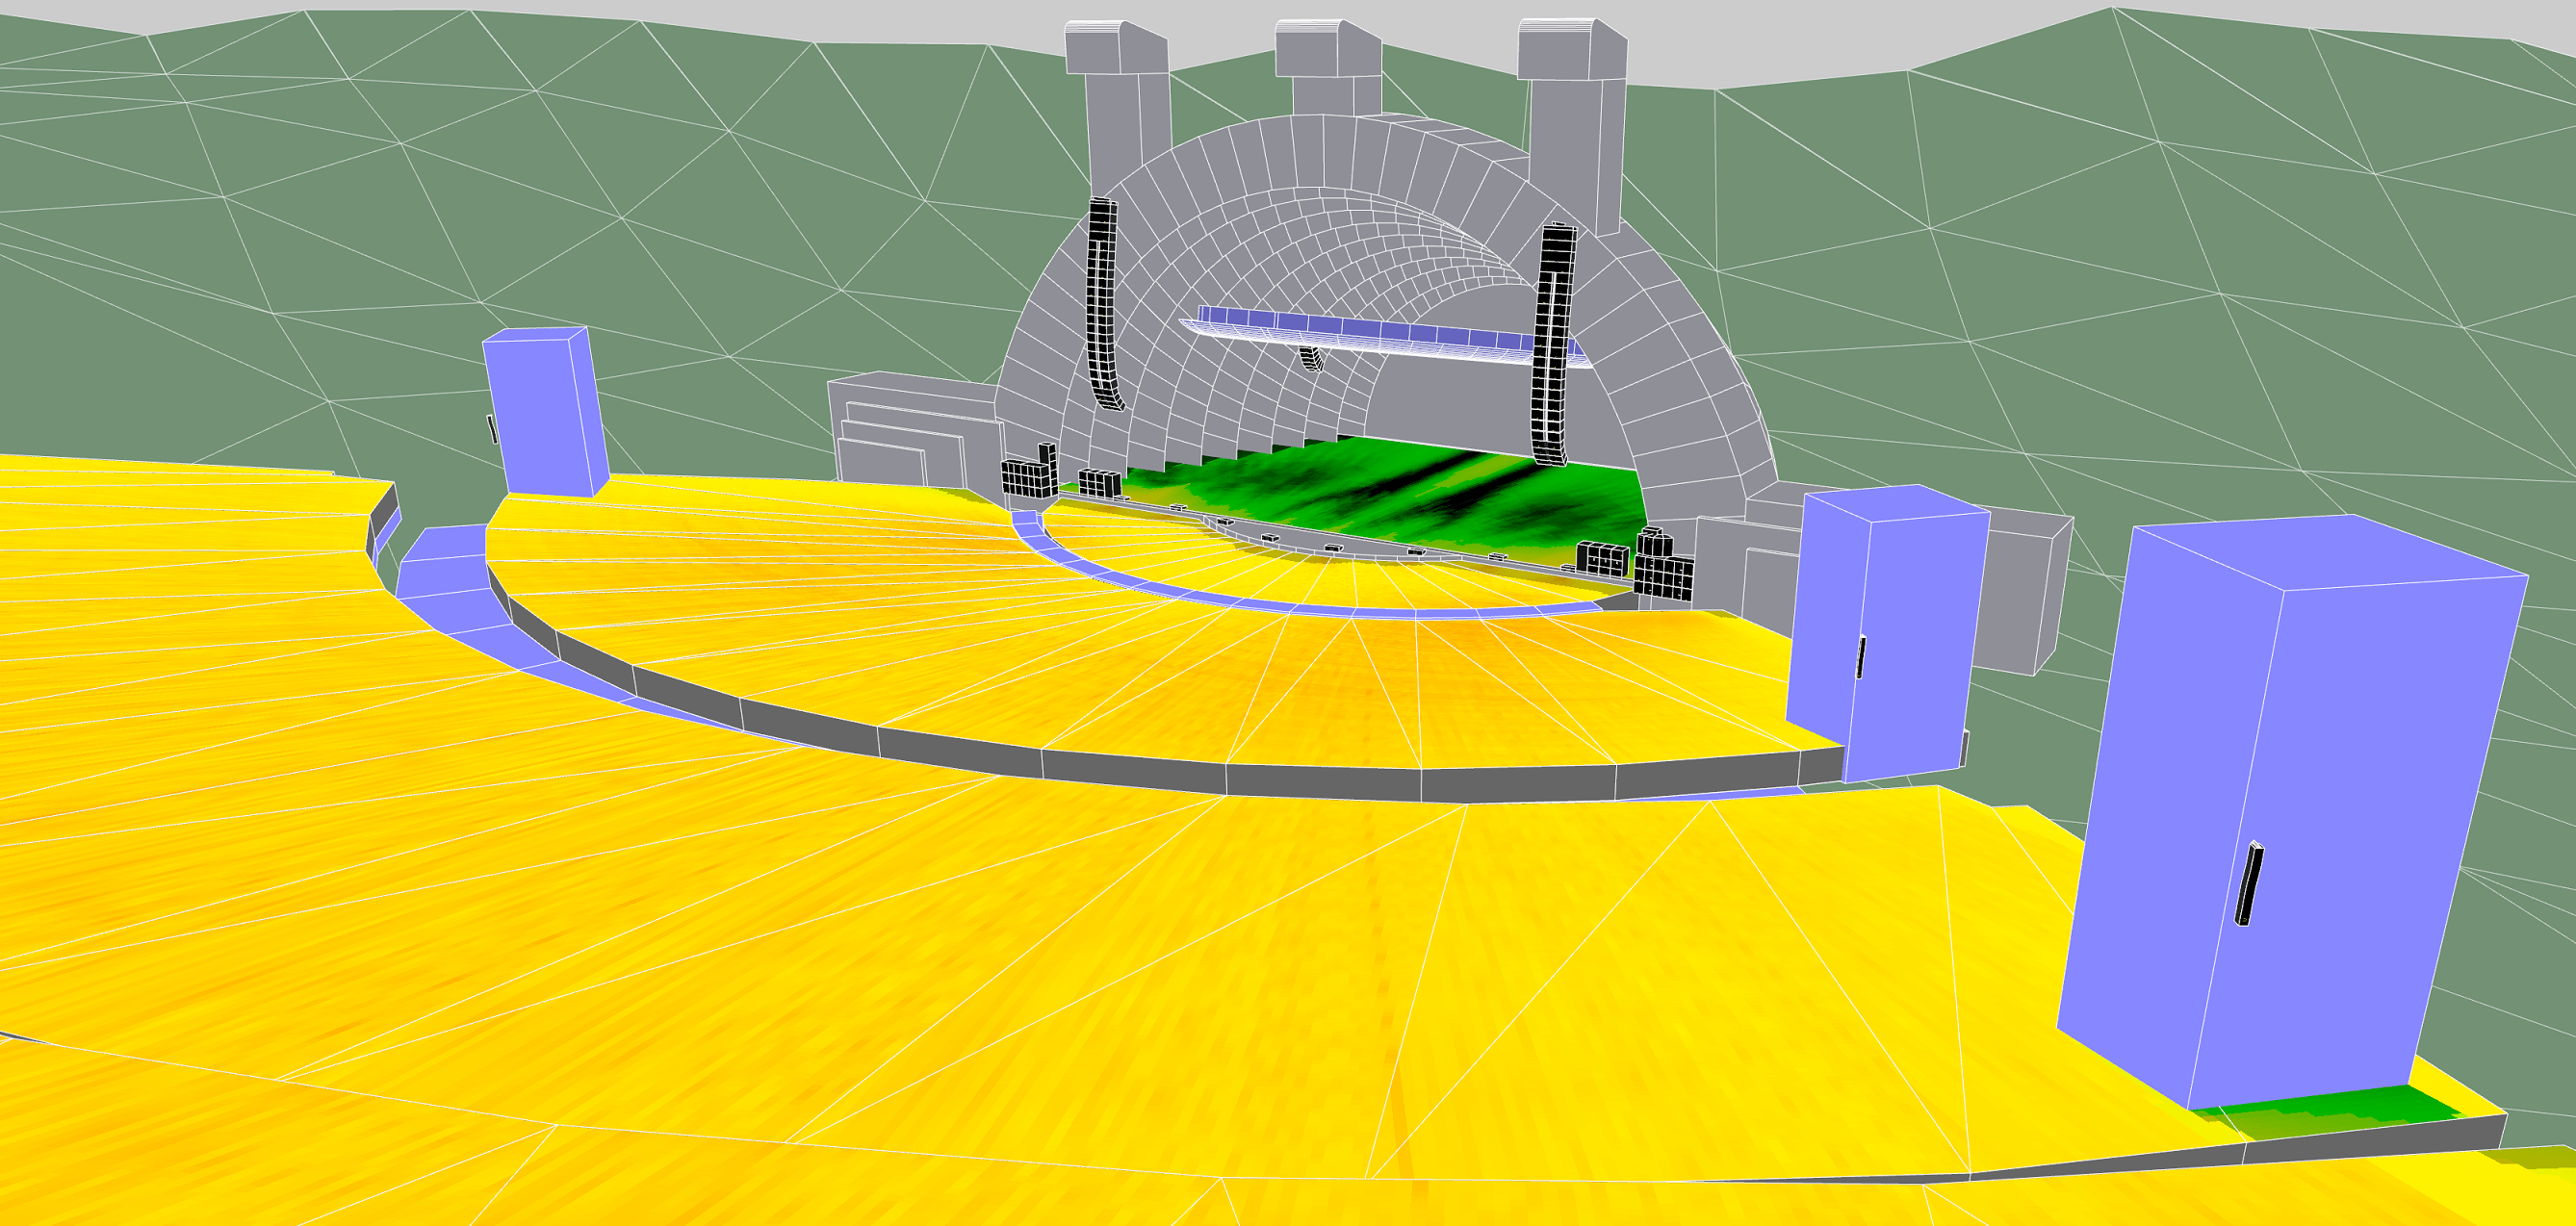 3D Model of sound system set up by L-Acoustics at the Hollywood Bowl